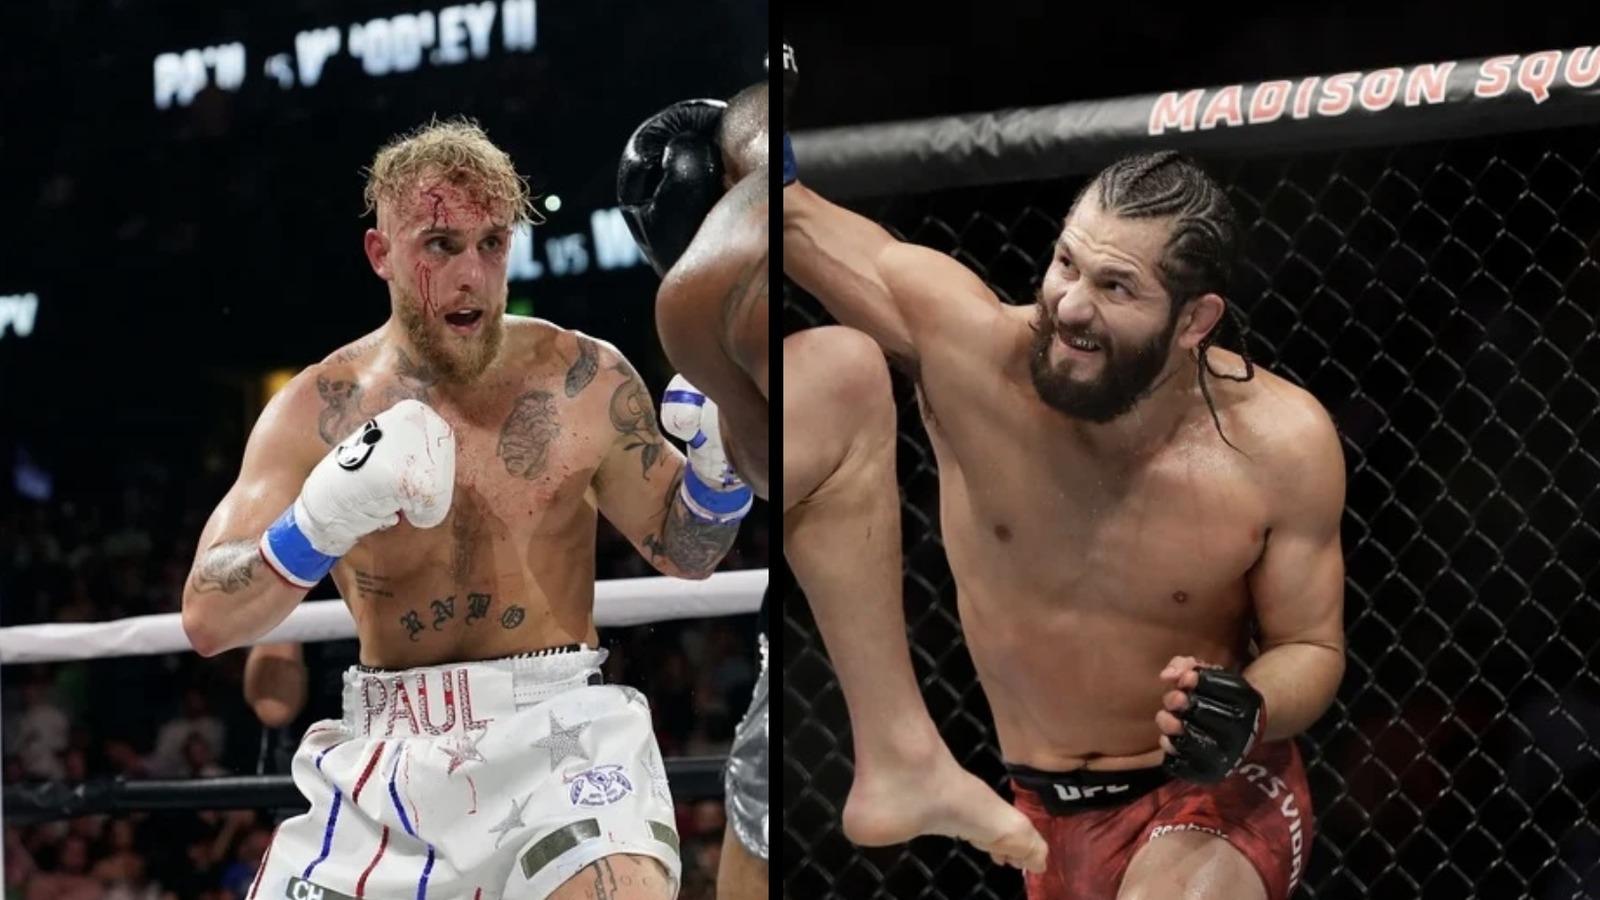 Jorge Masvidal revealed why he will not be fighting Jake Paul anytime soon